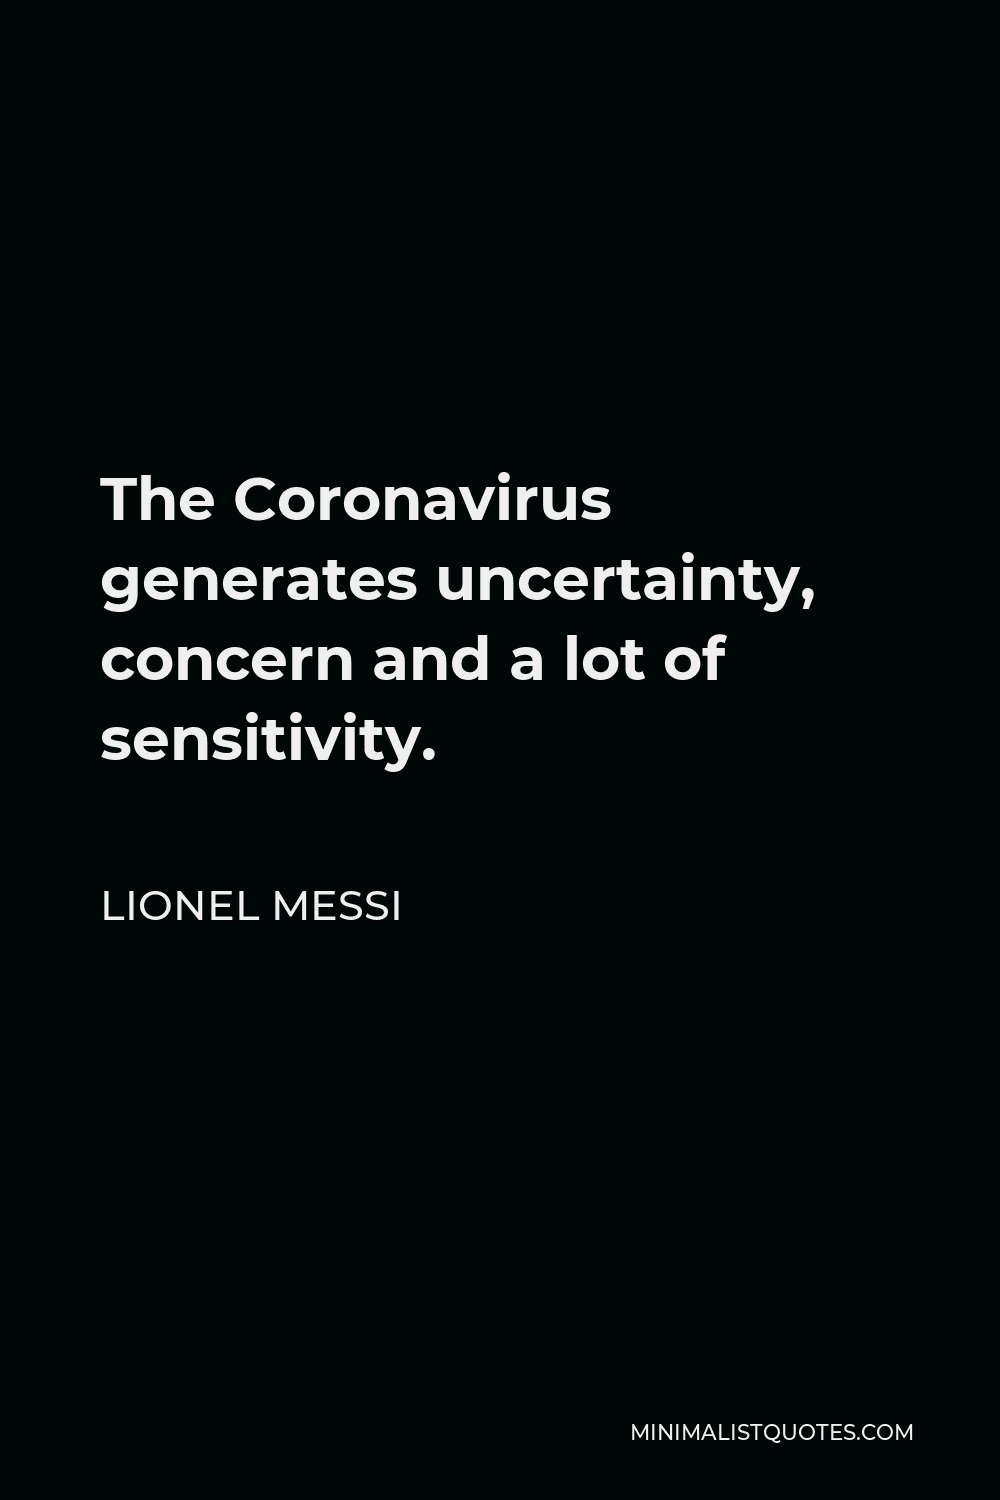 Lionel Messi Quote - The Coronavirus generates uncertainty, concern and a lot of sensitivity.